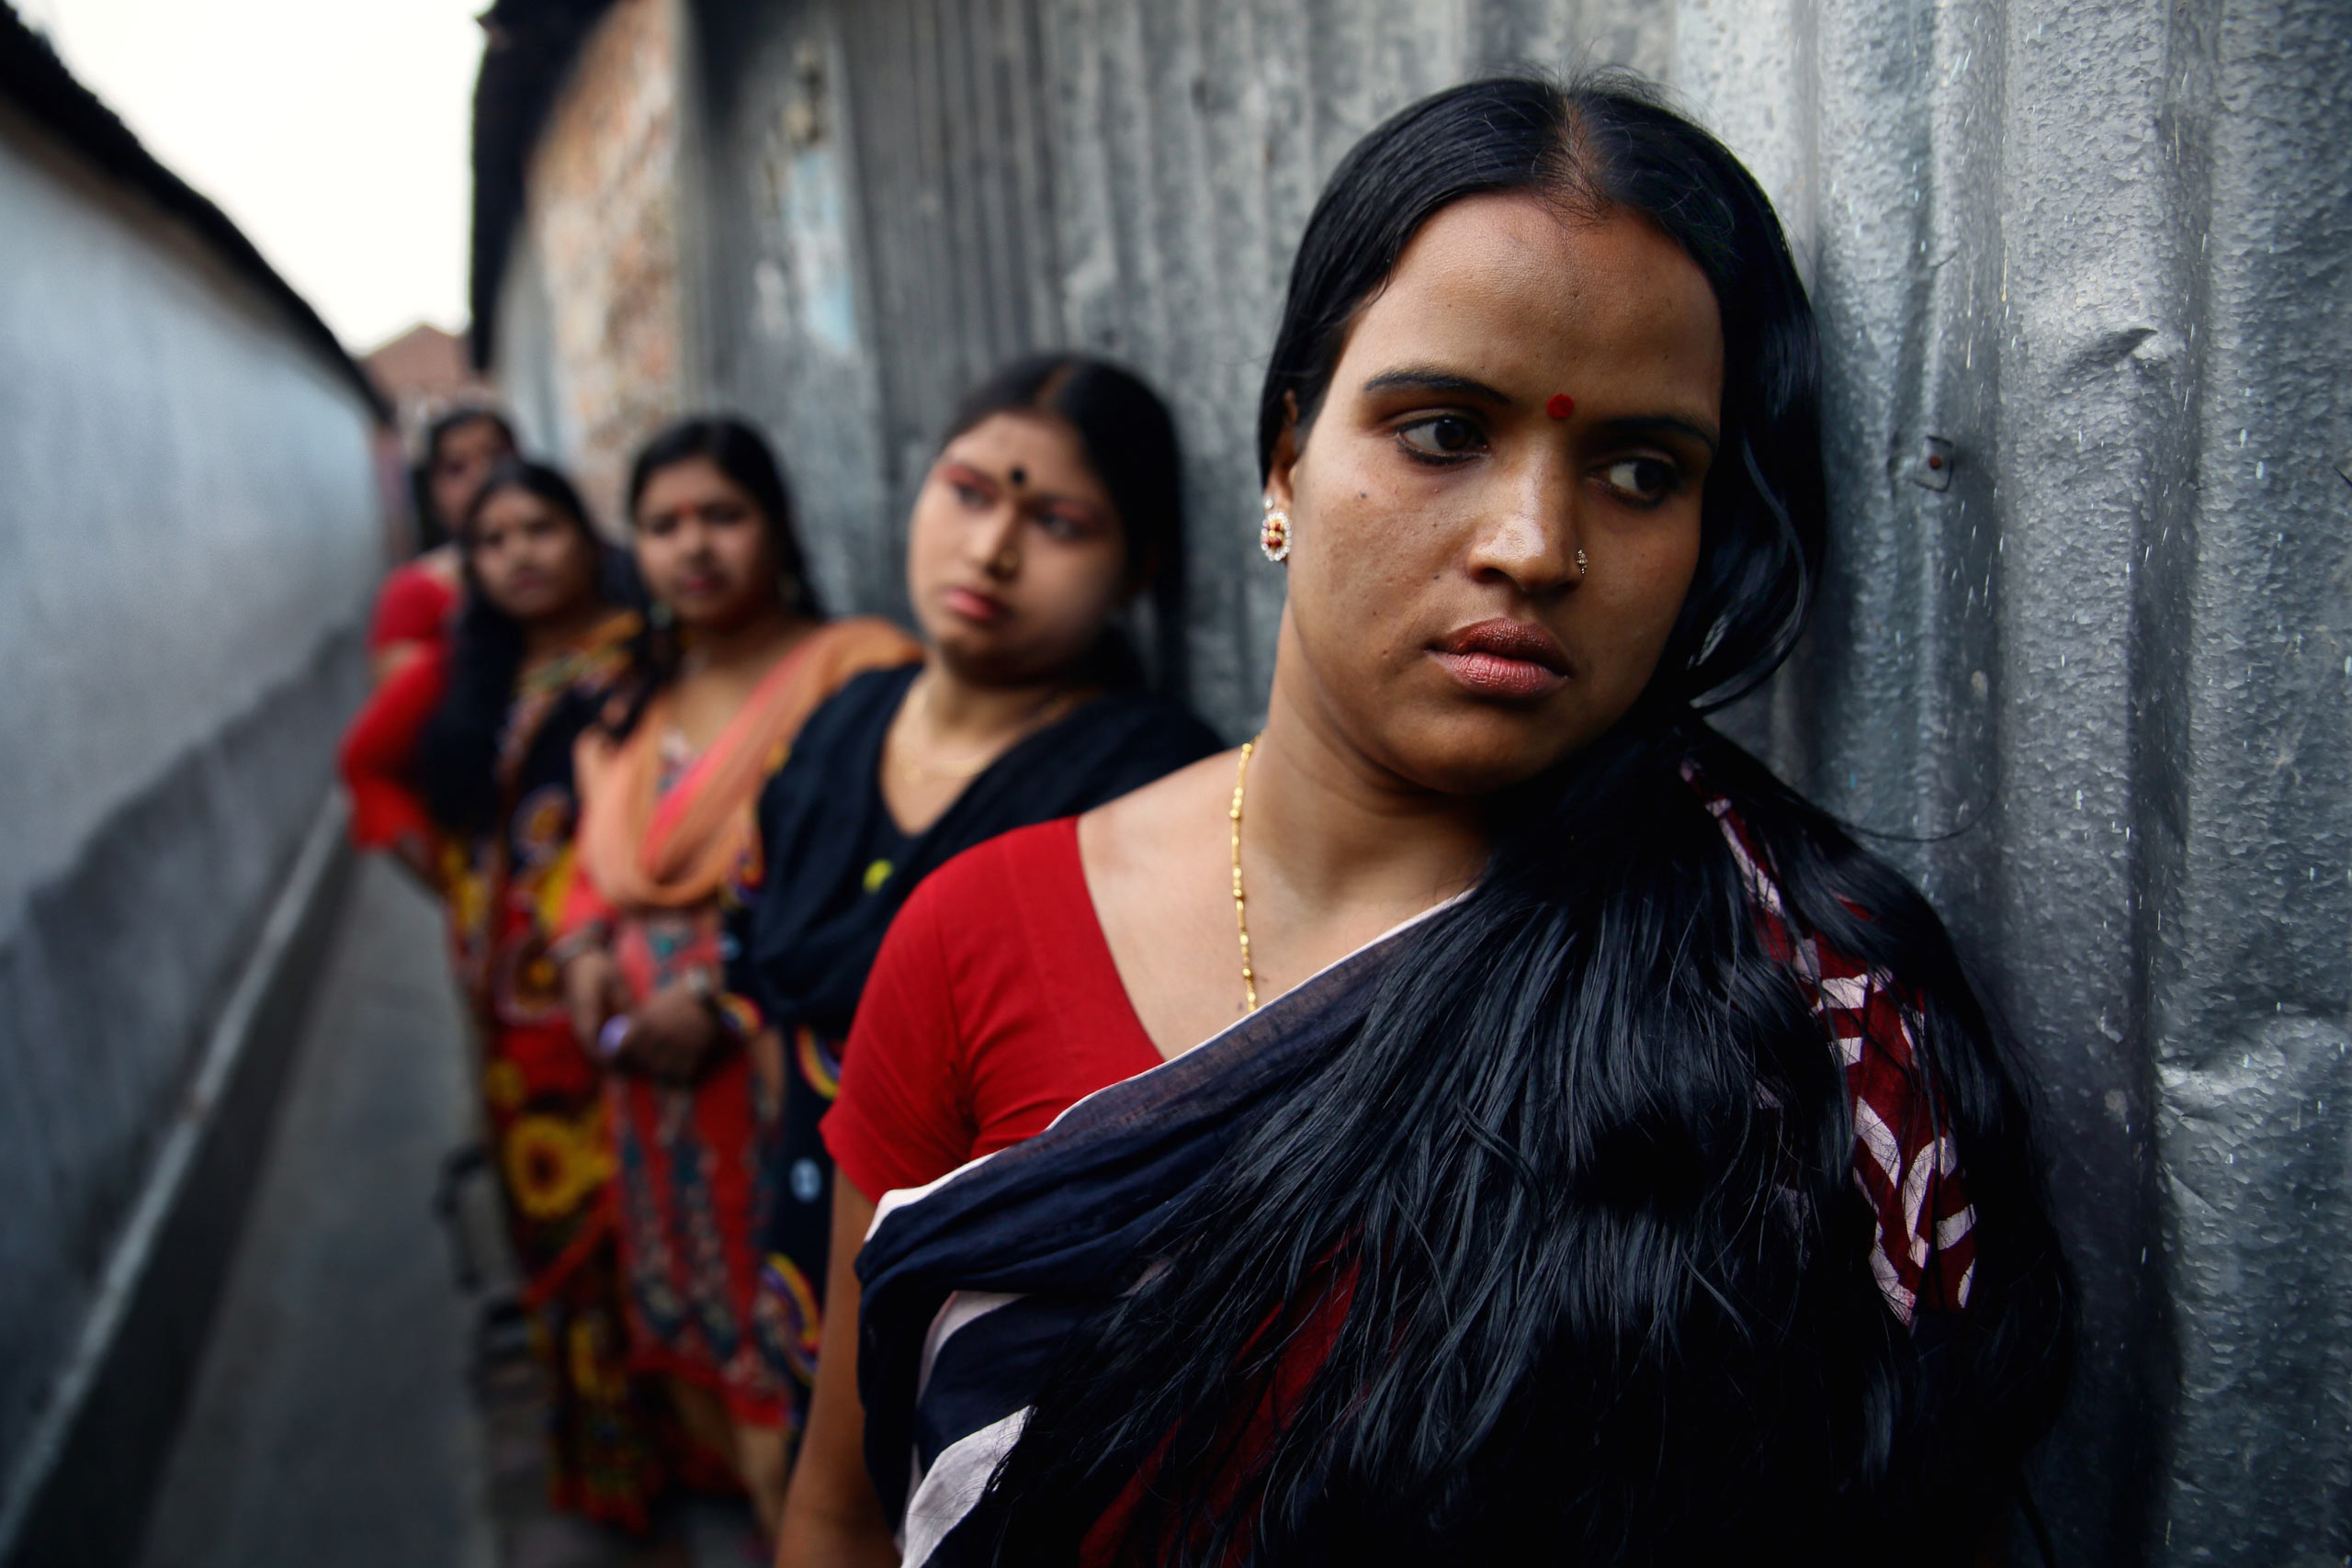 Jyotsna, 29, leads a line of sex workers, awaiting customers in an alleyway of Sonagachi, India.